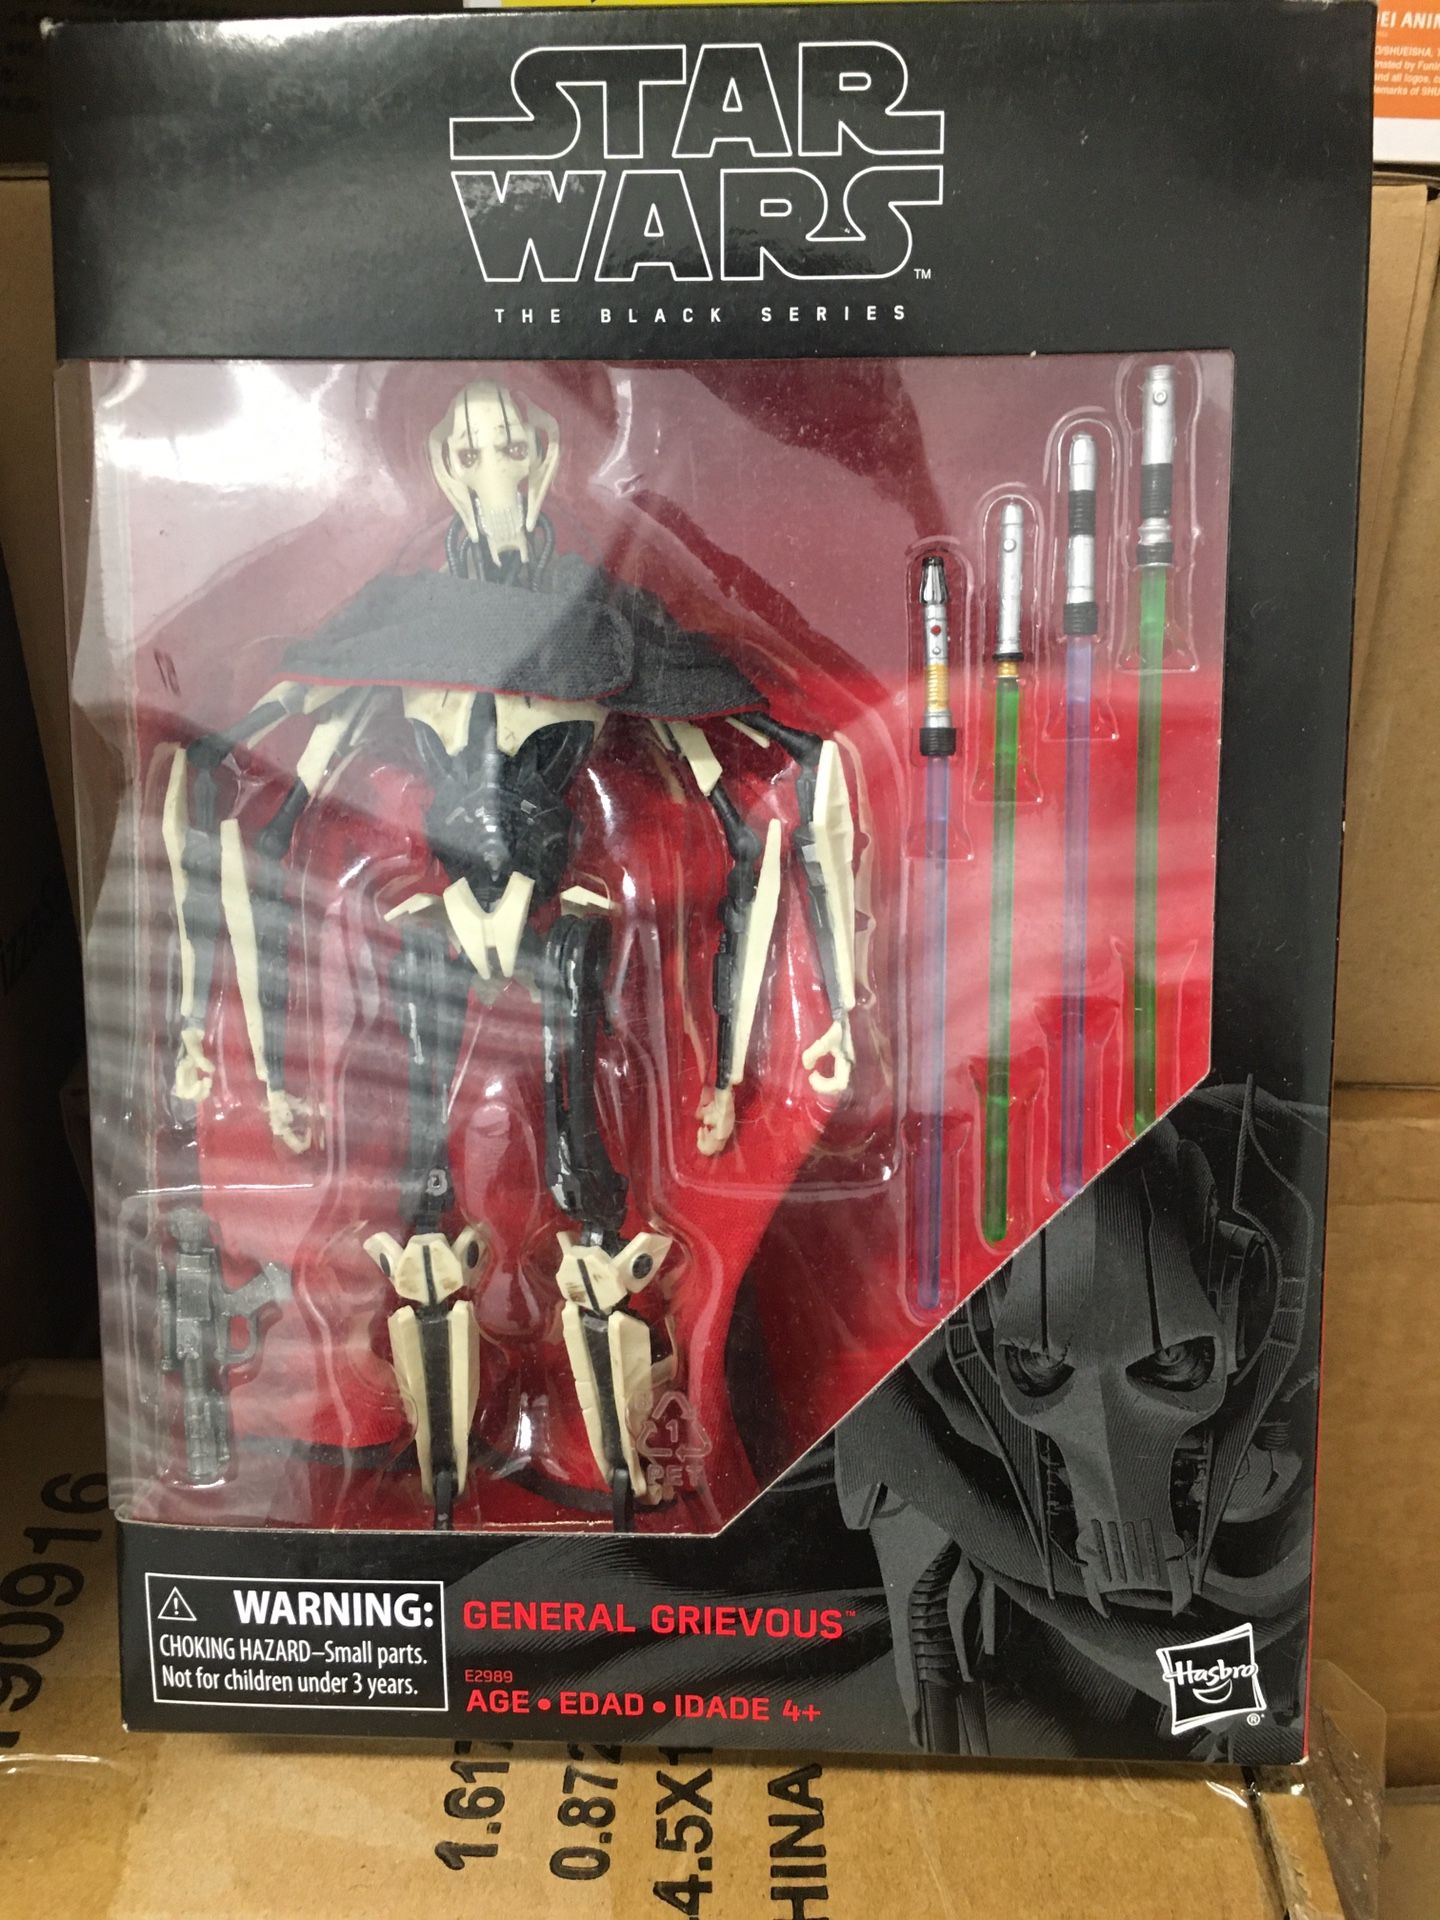 STAR WARS Black Series White Box First Edition Exclusive